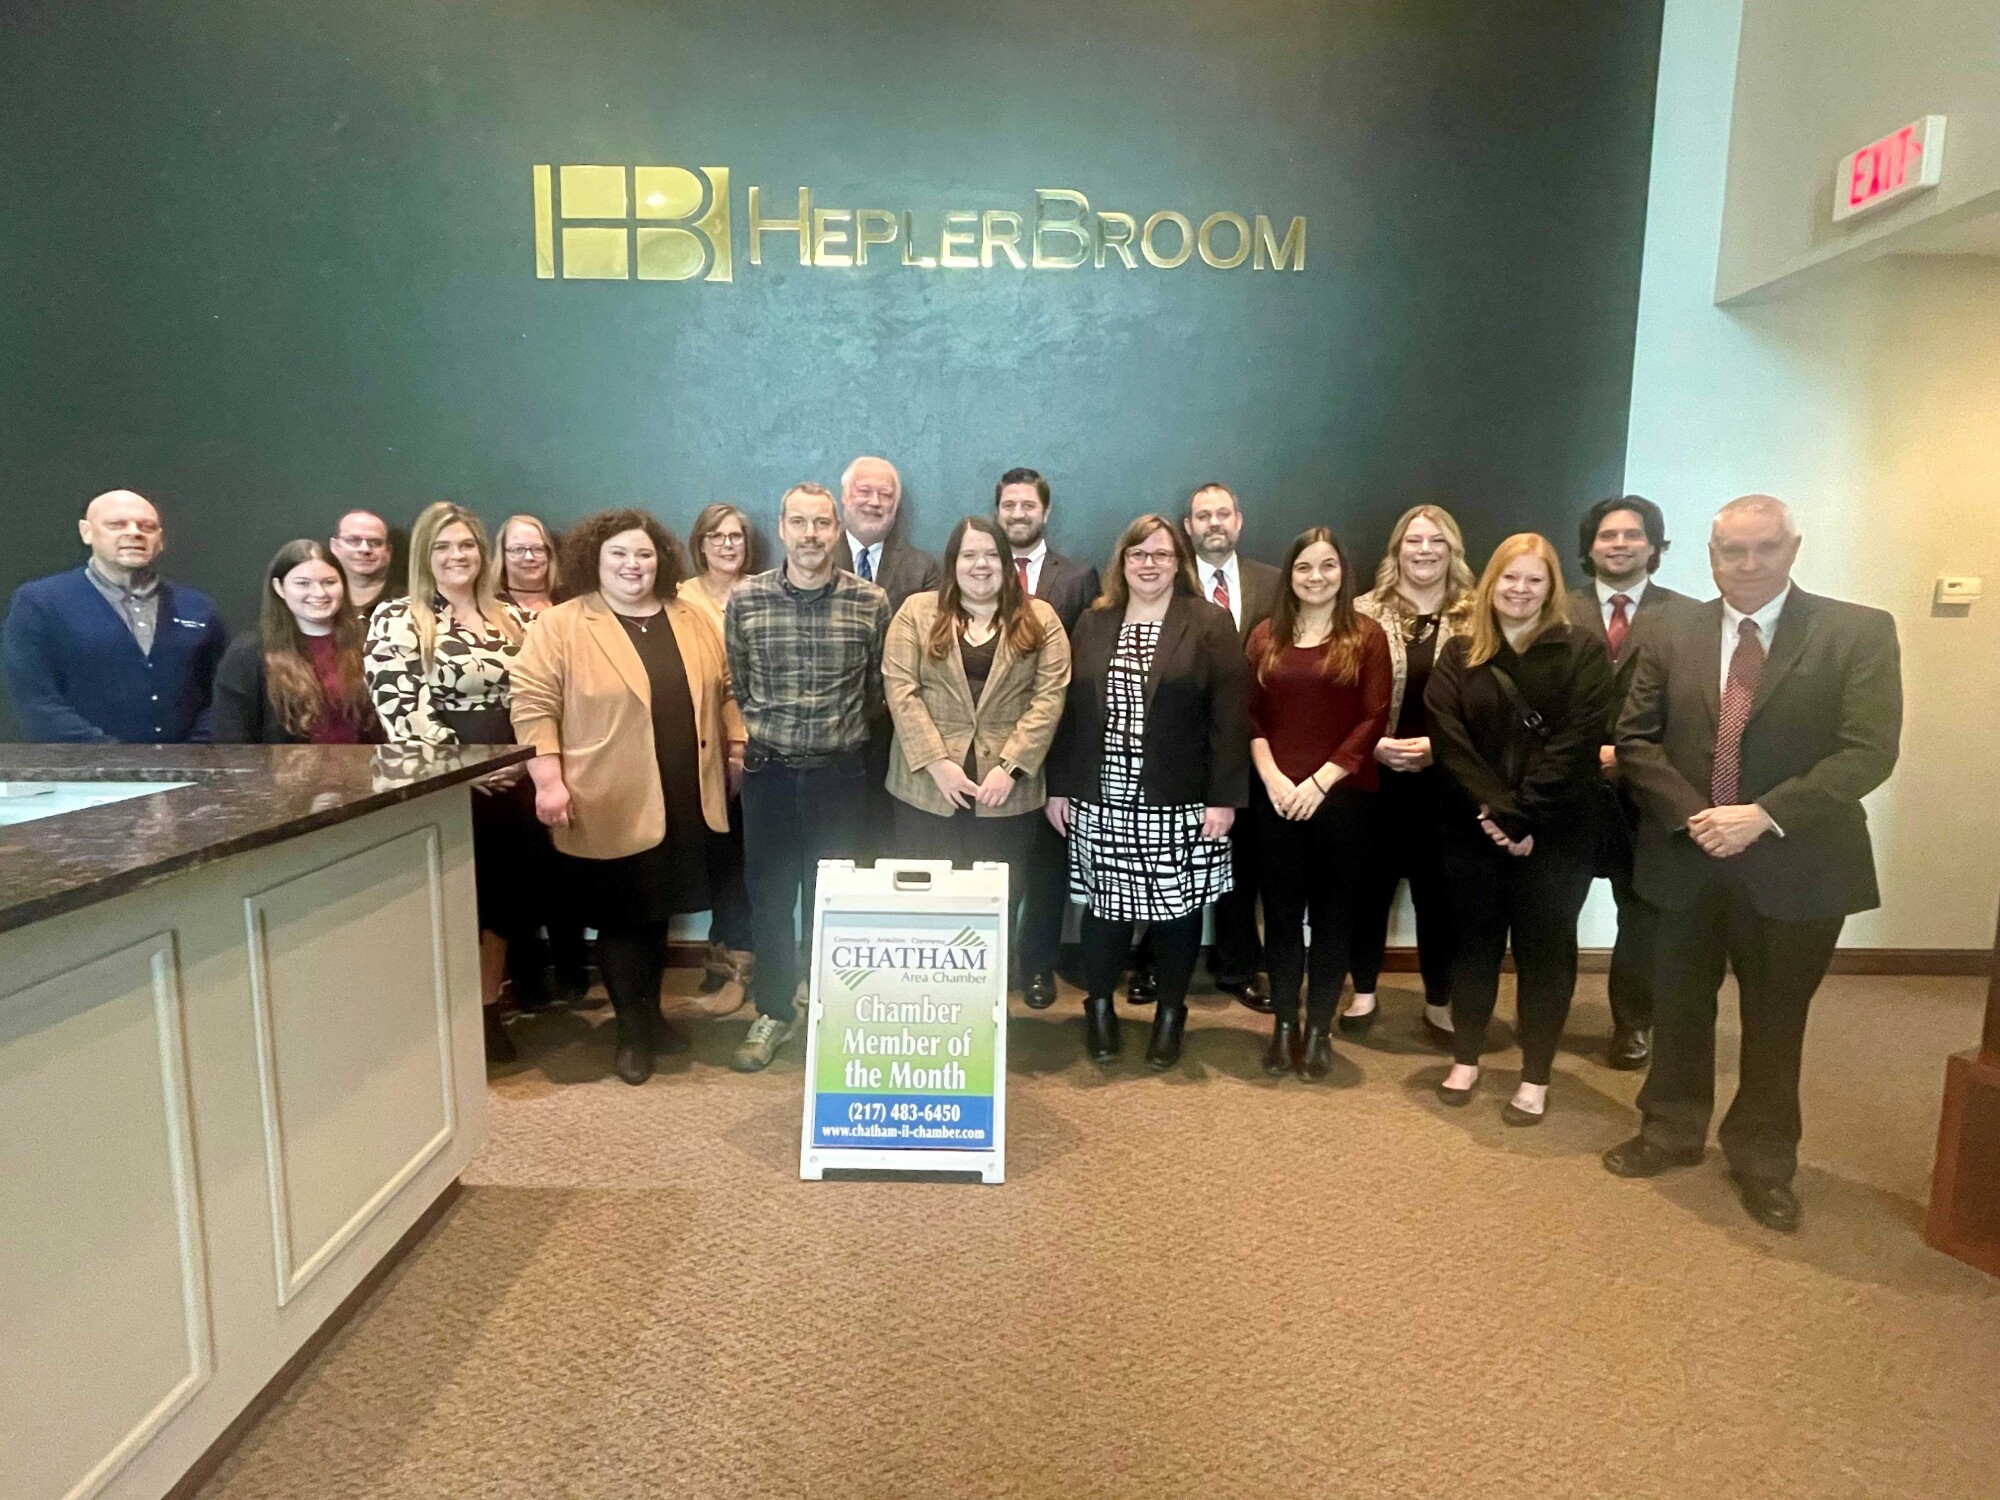 group of people standing in front of a sign that reads HB HeplerBroom